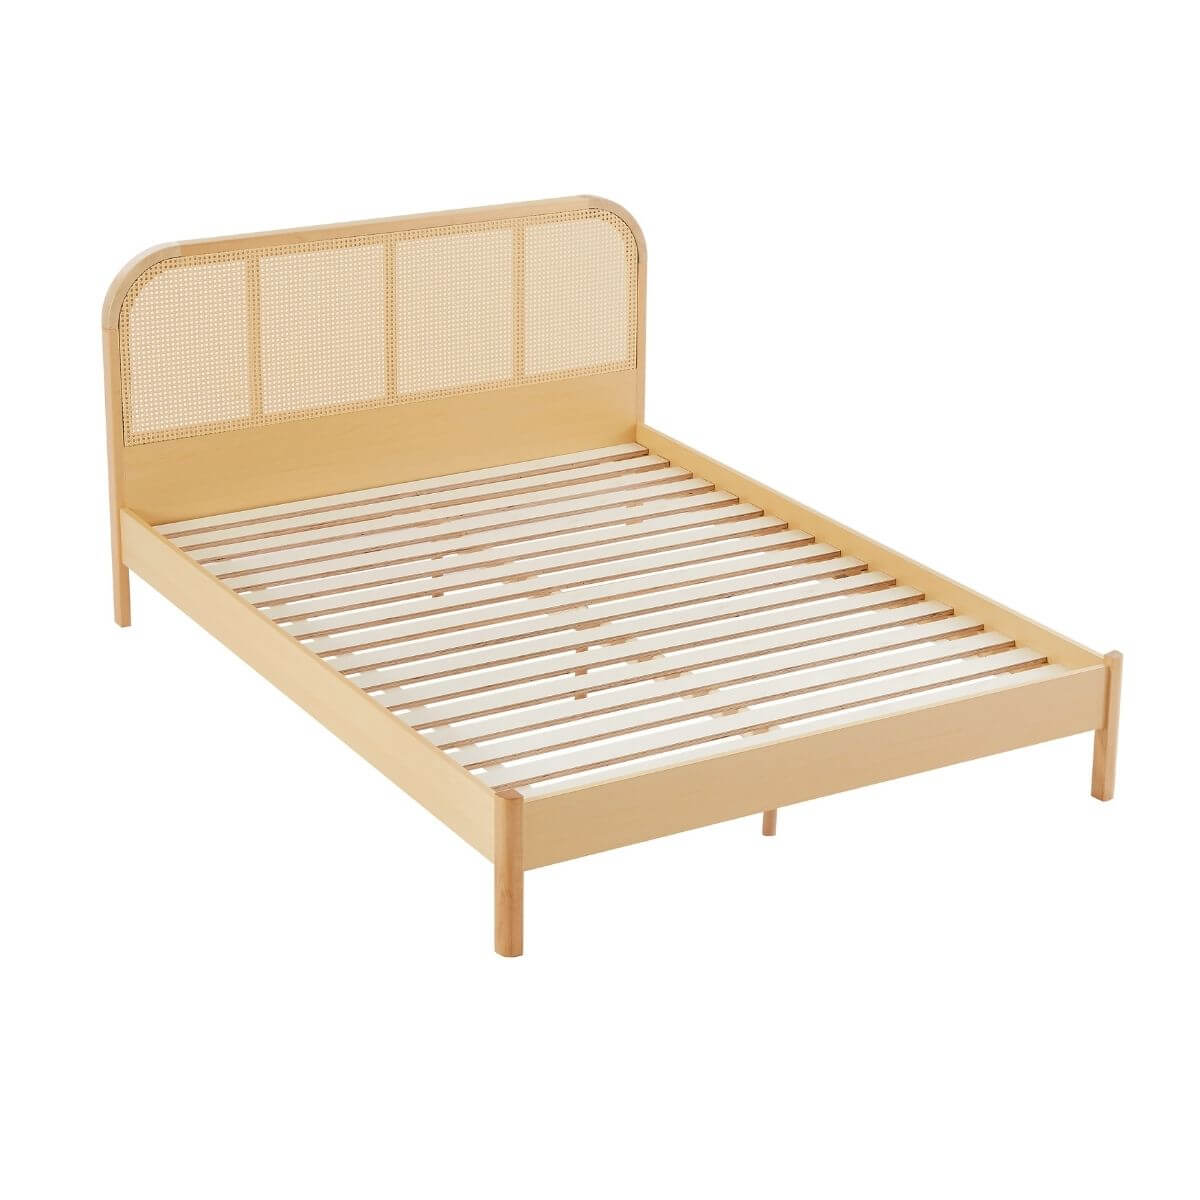 Lulu Bed Frame with Curved Rattan Bedhead - Queen-Upinteriors